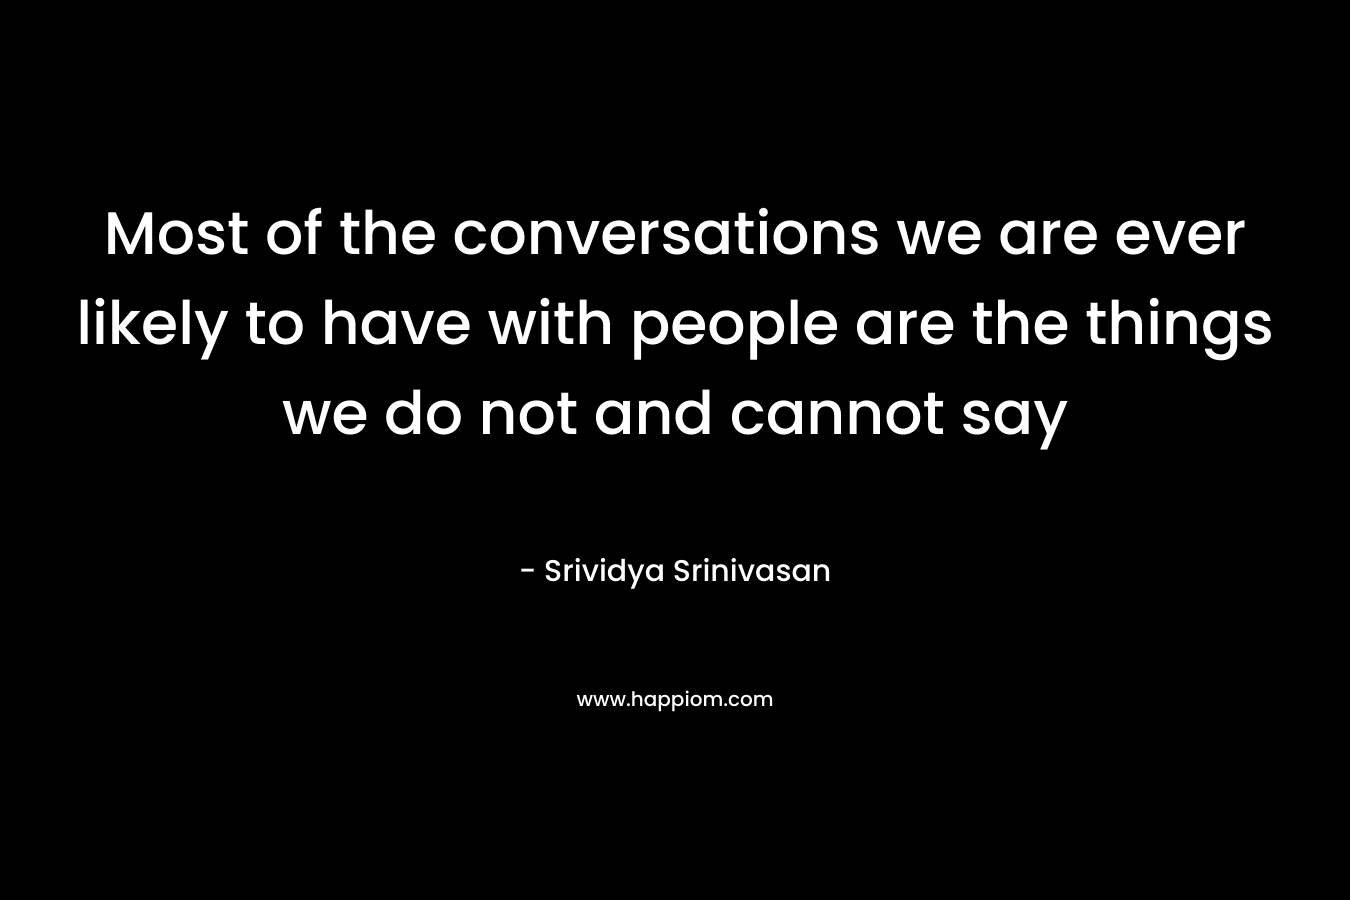 Most of the conversations we are ever likely to have with people are the things we do not and cannot say – Srividya Srinivasan